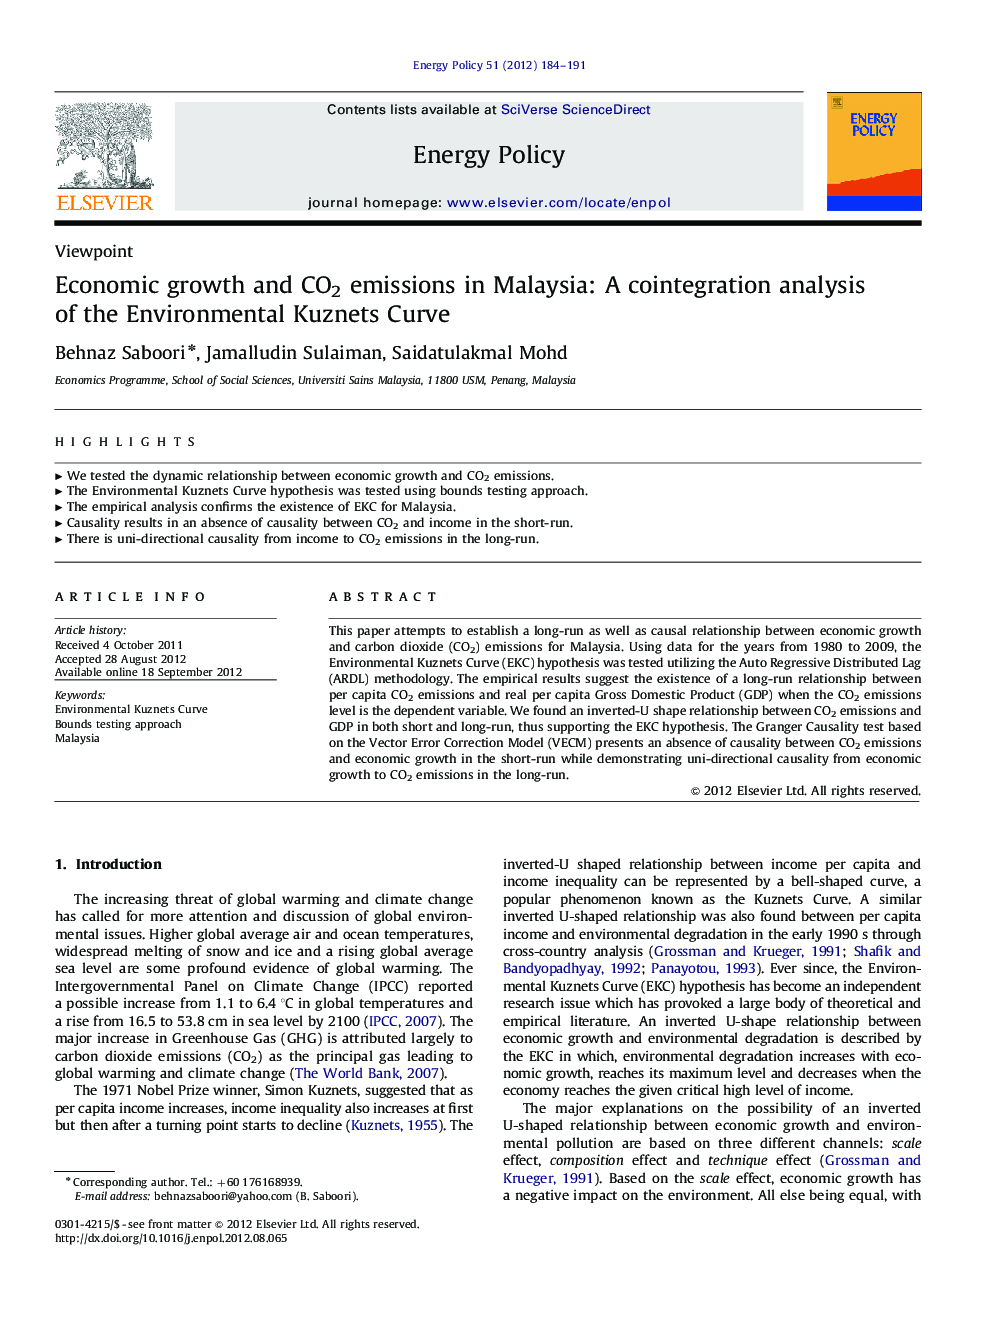 Economic growth and CO2 emissions in Malaysia: A cointegration analysis of the Environmental Kuznets Curve